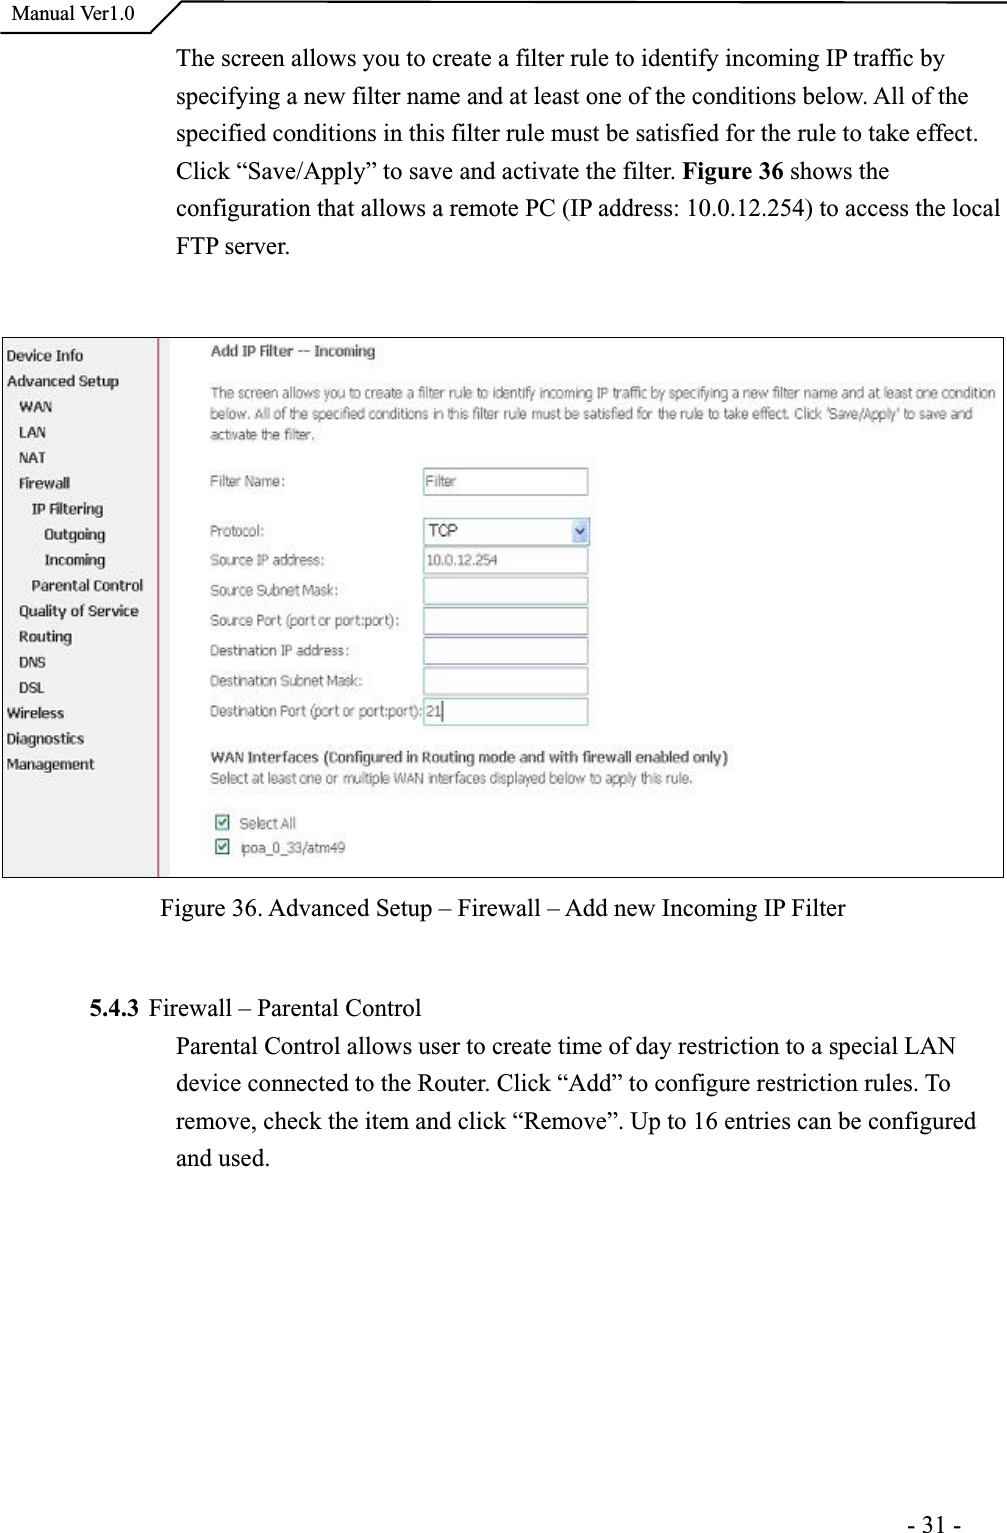  Manual Ver1.0The screen allows you to create a filter rule to identify incoming IP traffic by specifying a new filter name and at least one of the conditions below. All of the specified conditions in this filter rule must be satisfied for the rule to take effect.Click “Save/Apply” to save and activate the filter. Figure 36 shows the configuration that allows a remote PC (IP address: 10.0.12.254) to access the local FTP server.Figure 36. Advanced Setup – Firewall – Add new Incoming IP Filter 5.4.3 Firewall – Parental Control Parental Control allows user to create time of day restriction to a special LAN device connected to the Router. Click “Add” to configure restriction rules. Toremove, check the item and click “Remove”. Up to 16 entries can be configured and used.                                                                      -31-